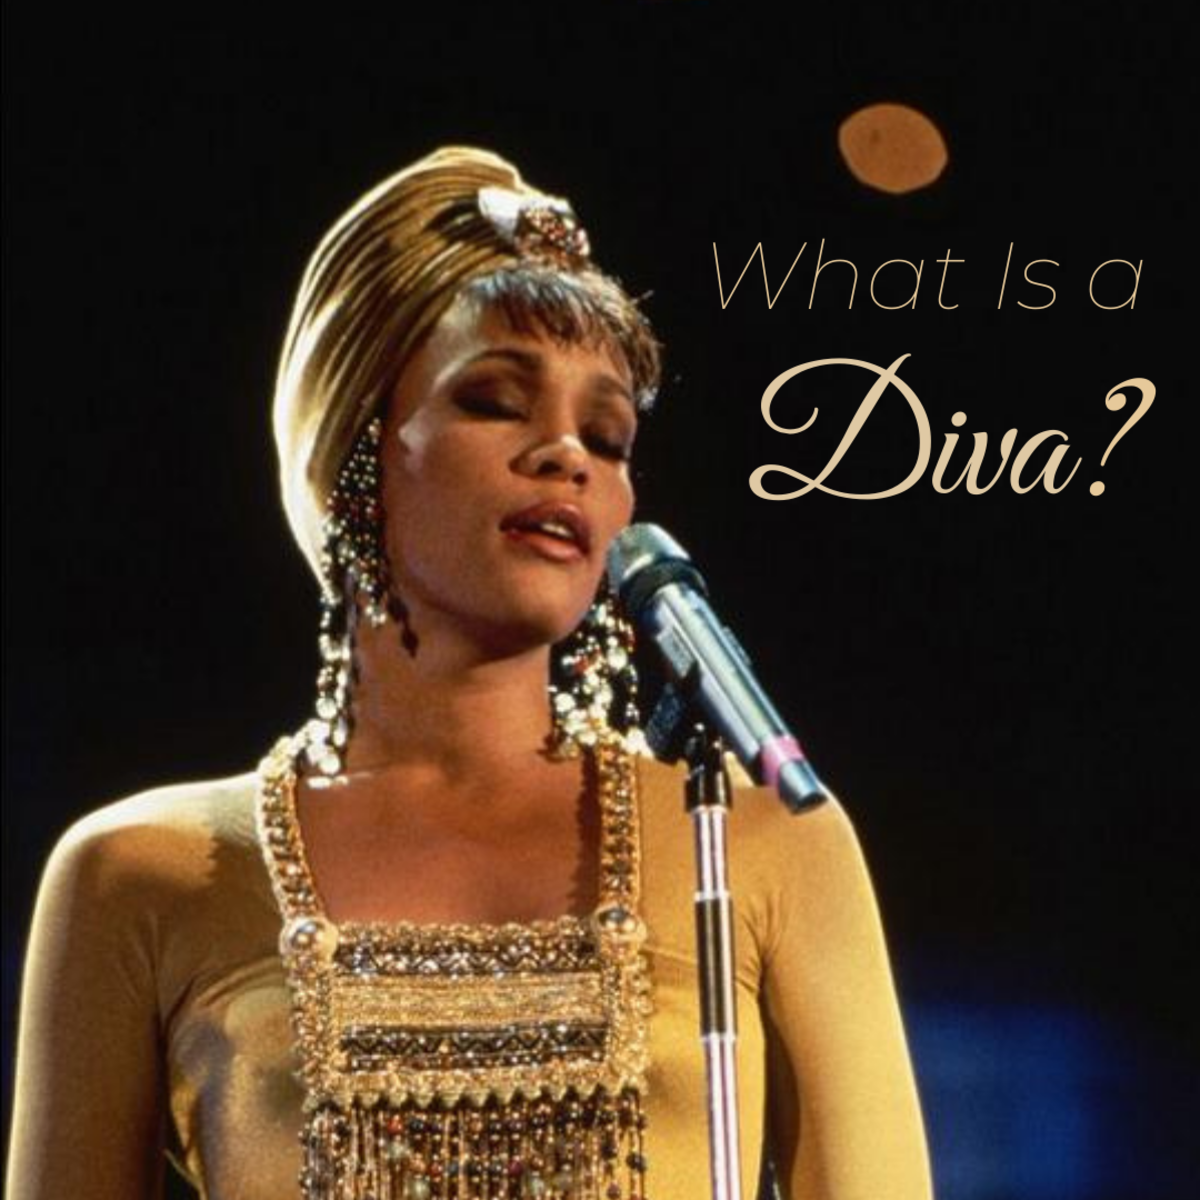 What Is a Diva?